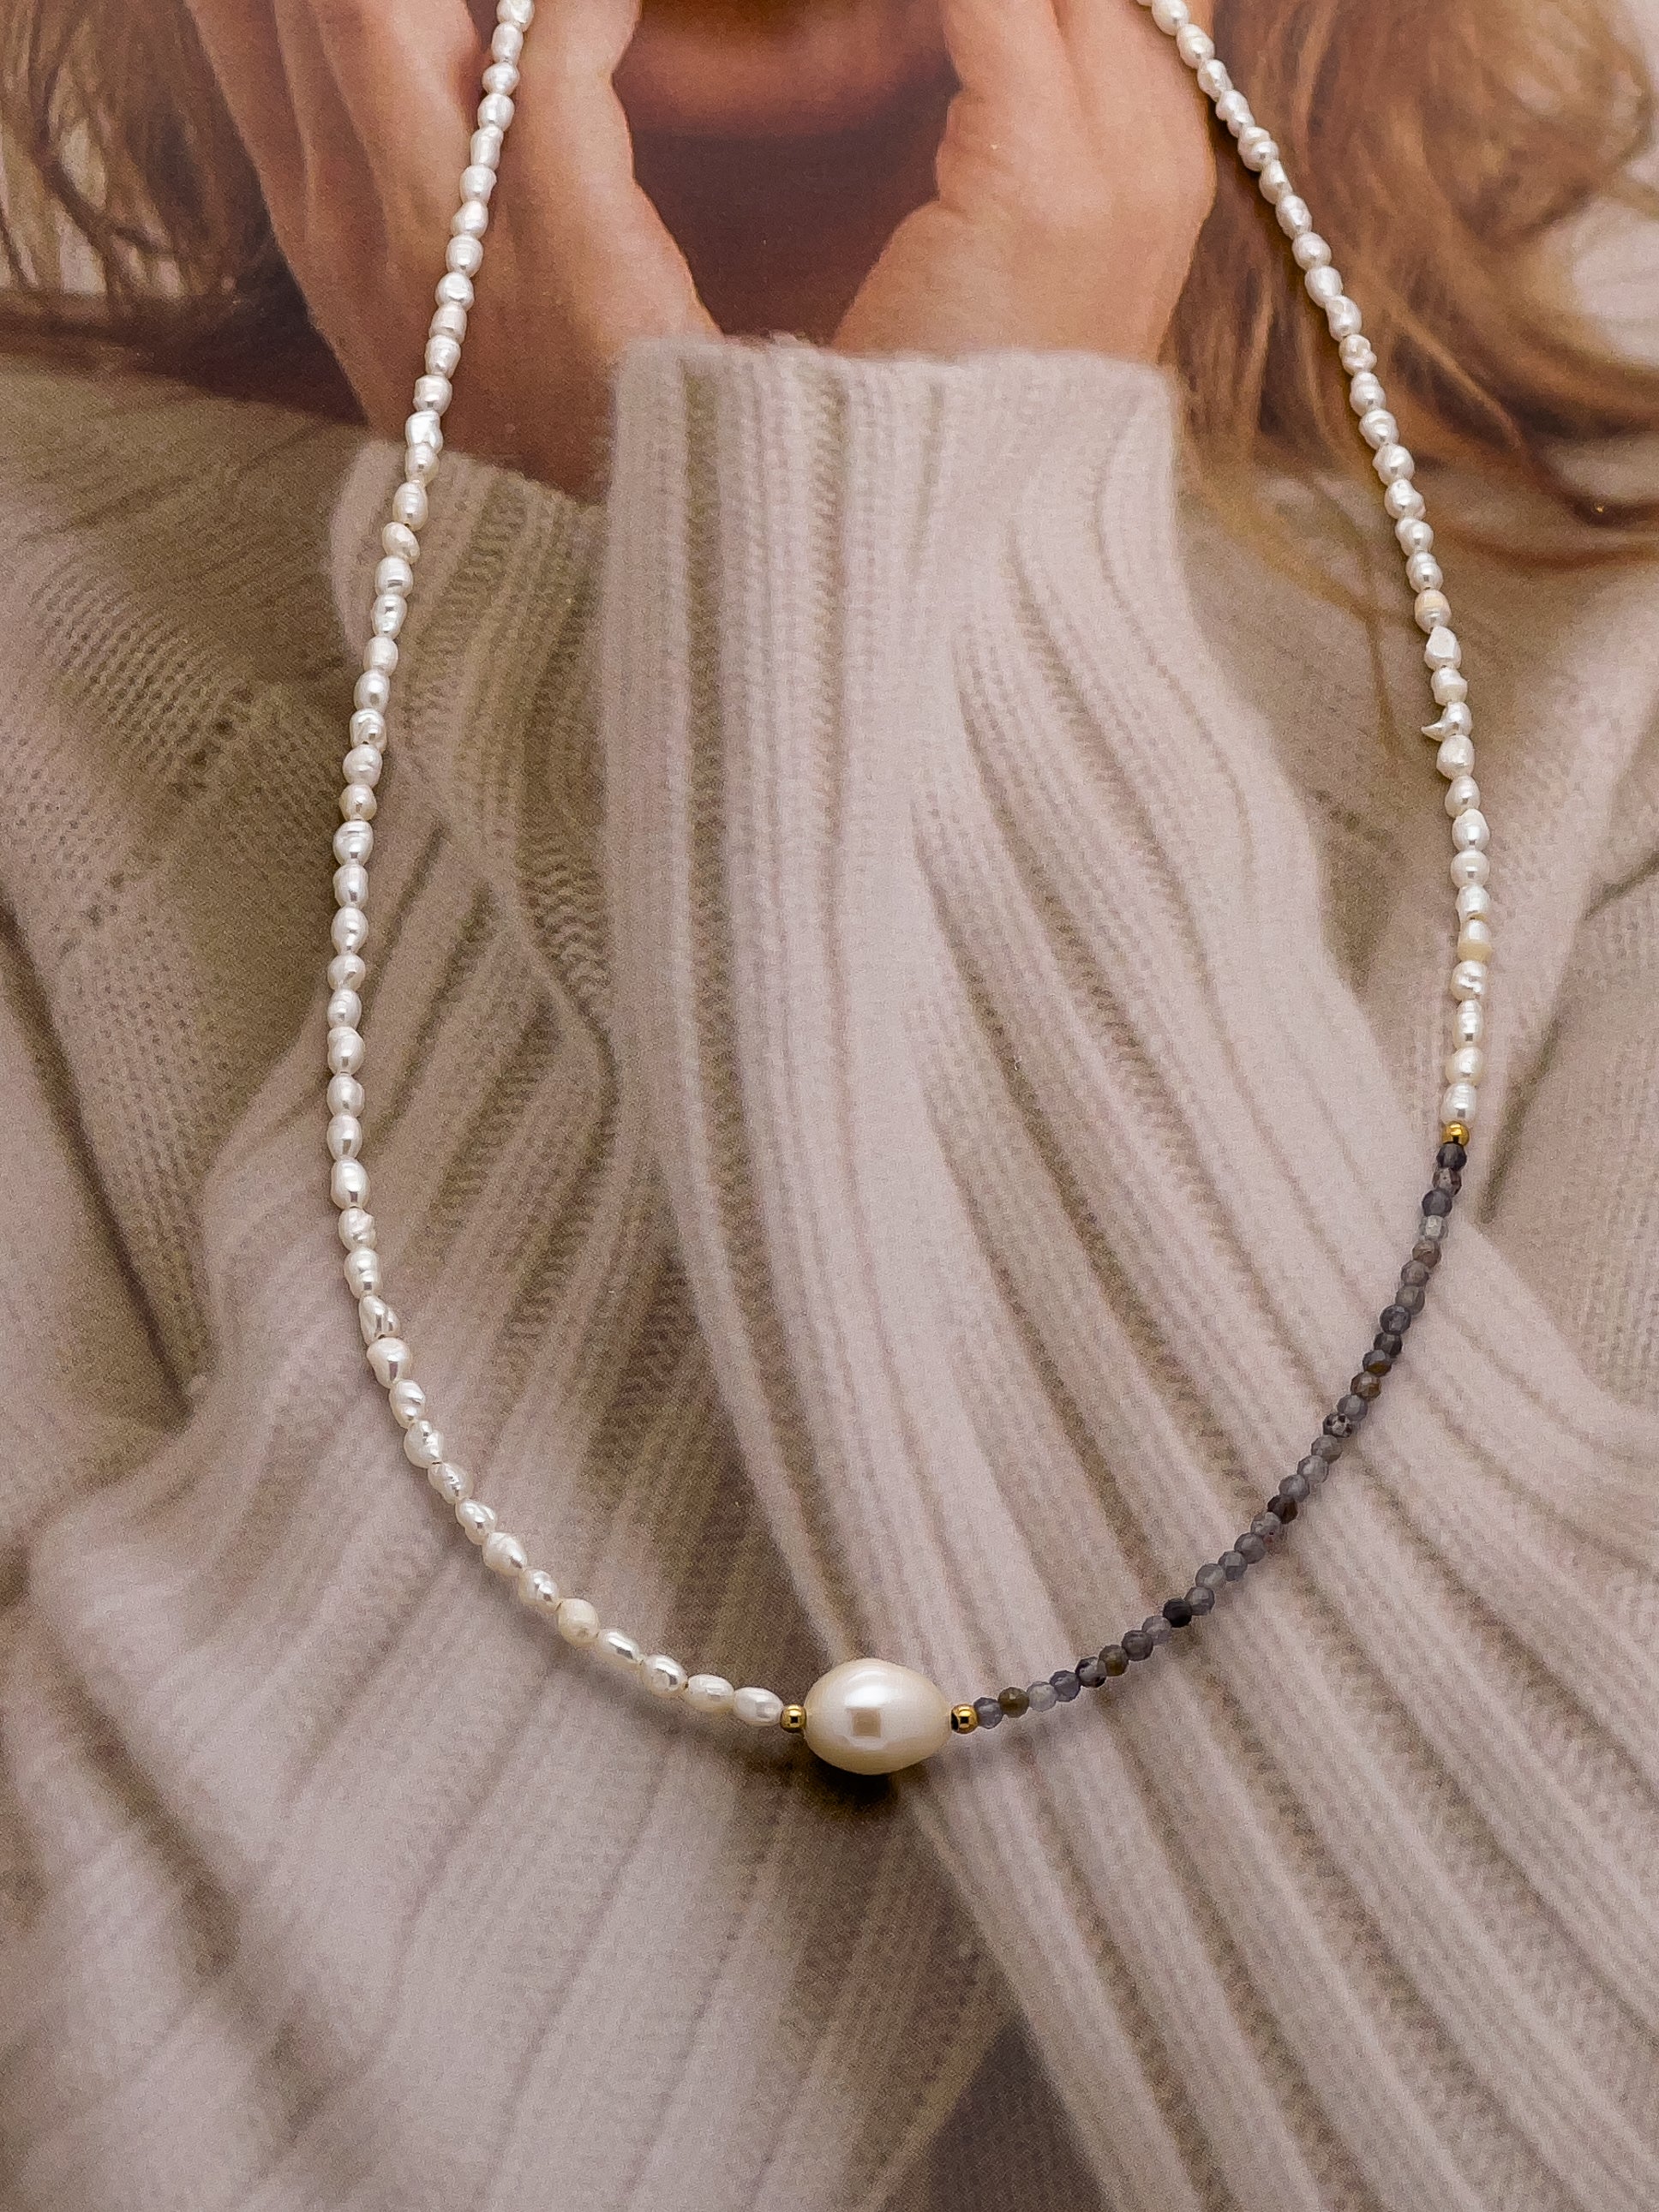 River Pearl Gem Choker Necklace - Everyday Jewelry | Chic Chic Bon